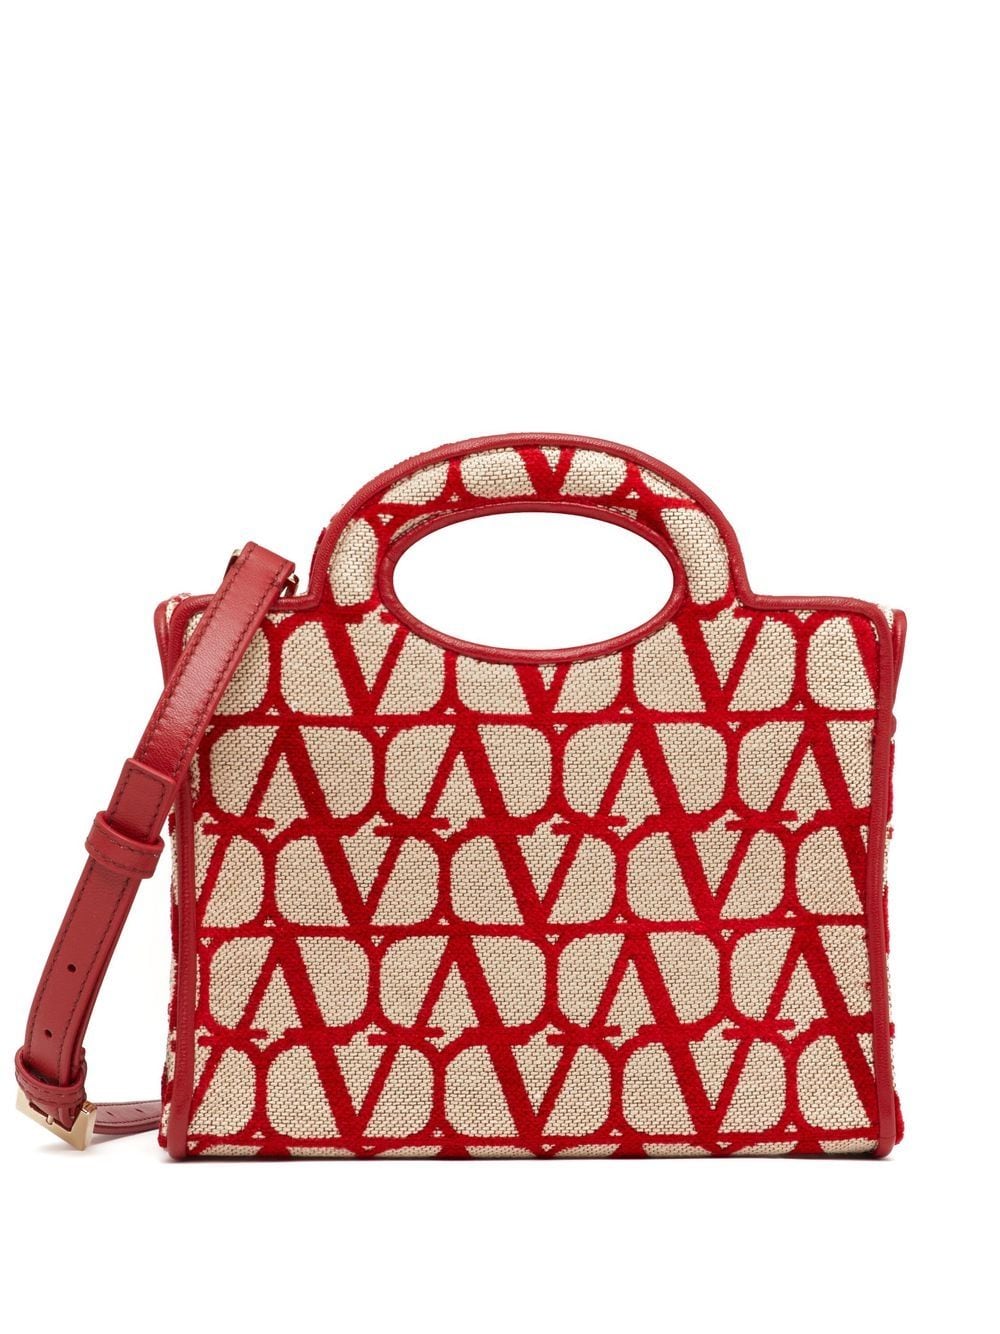 La Troisieme Toile Iconographe Shopping Bag for Woman in Beige/red